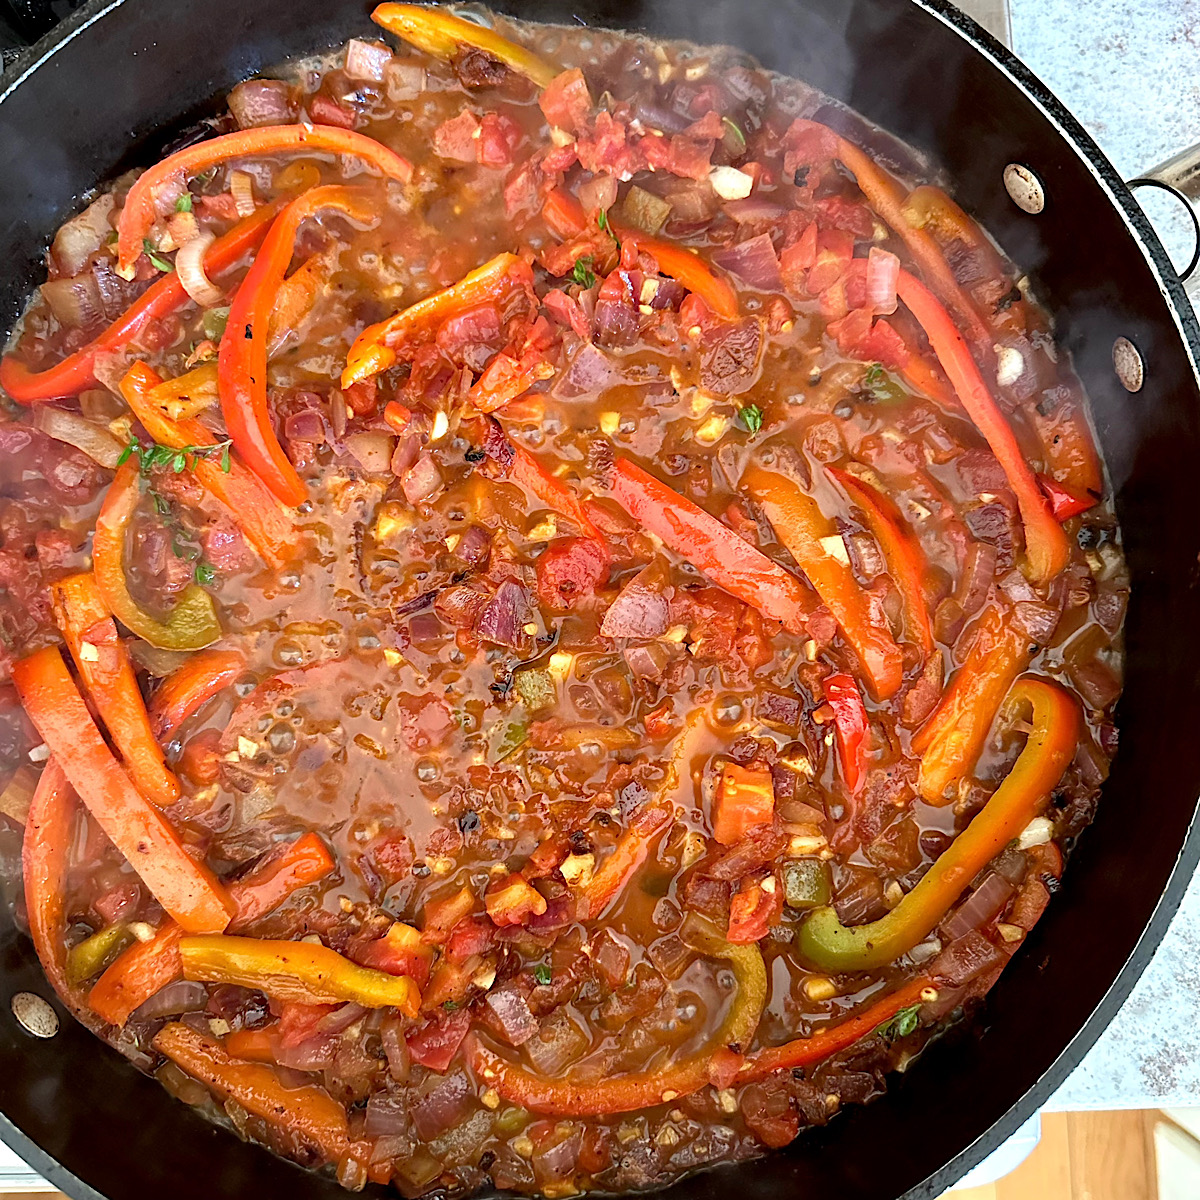 Skillet of onions and peppers cooking in sherry and herbs.